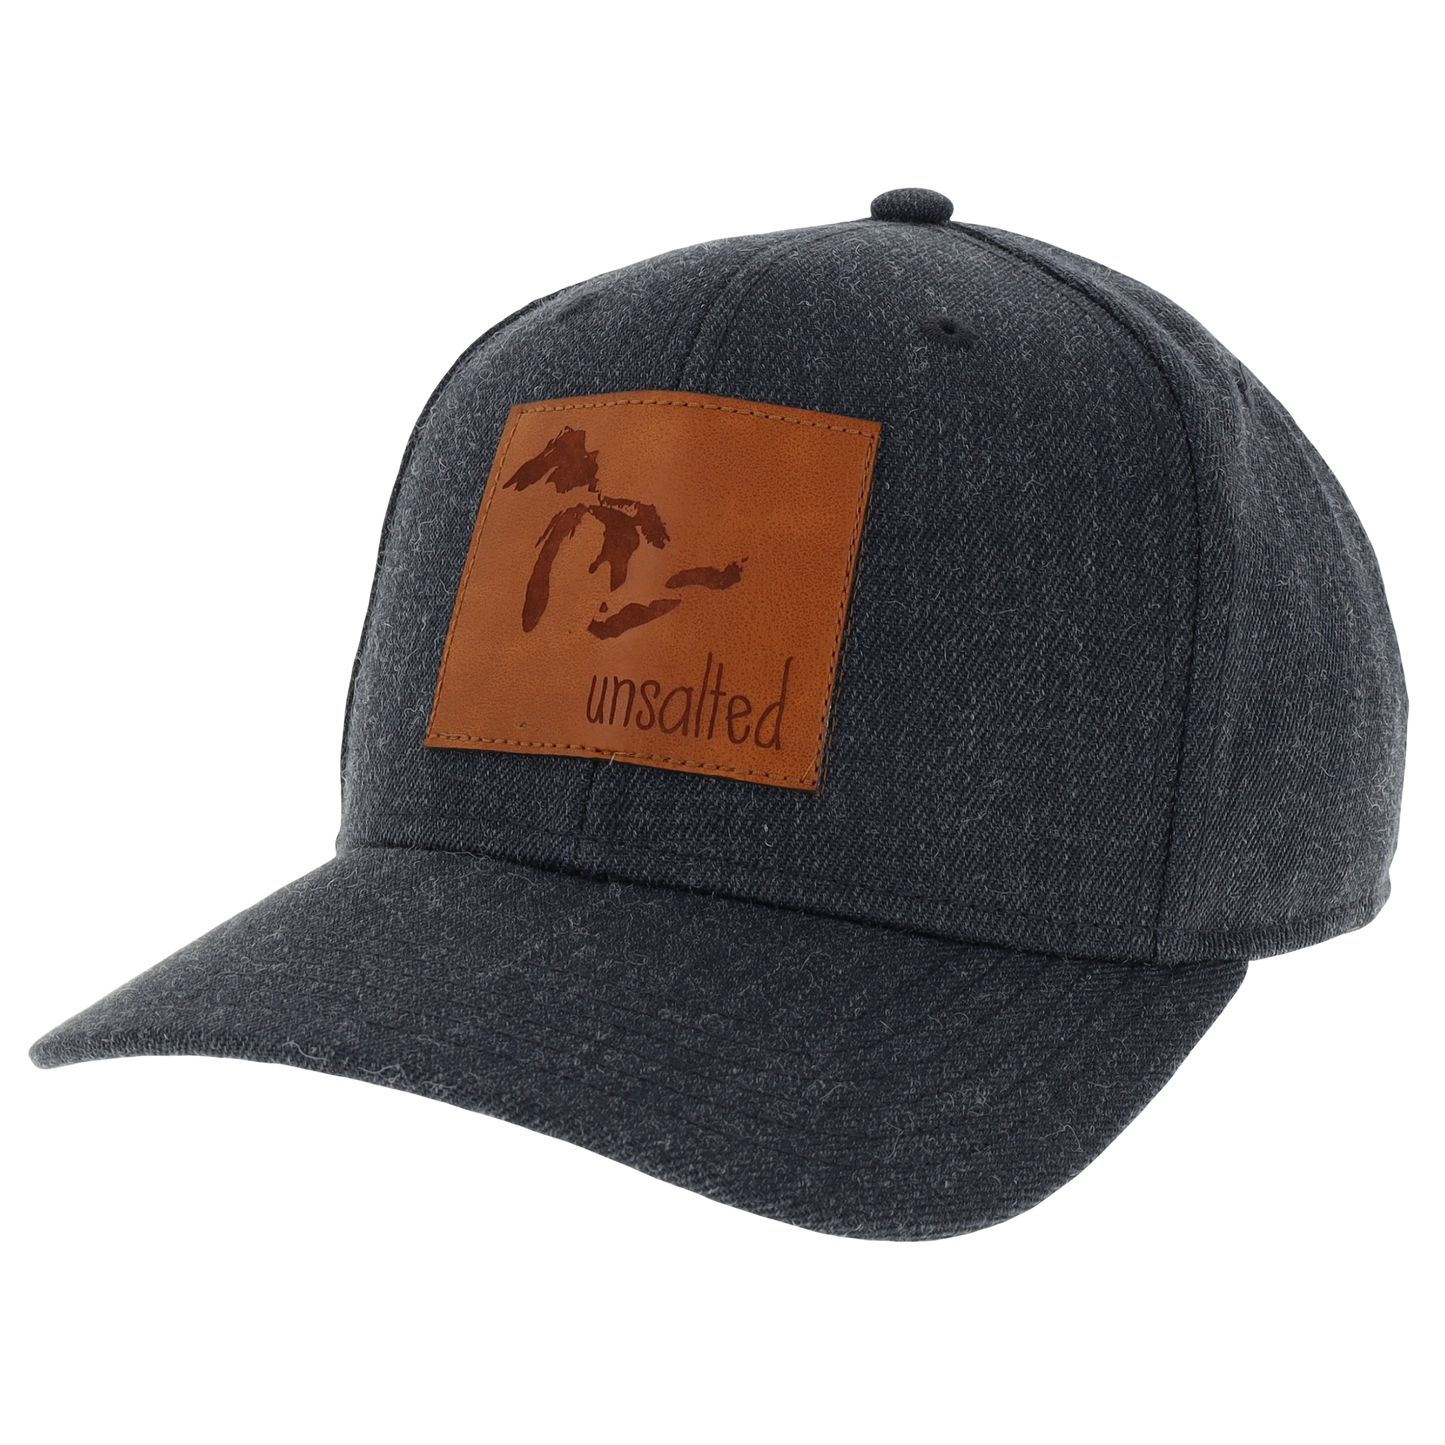 Unsalted Mid-Pro Hat in Heather Navy with Leather Patch